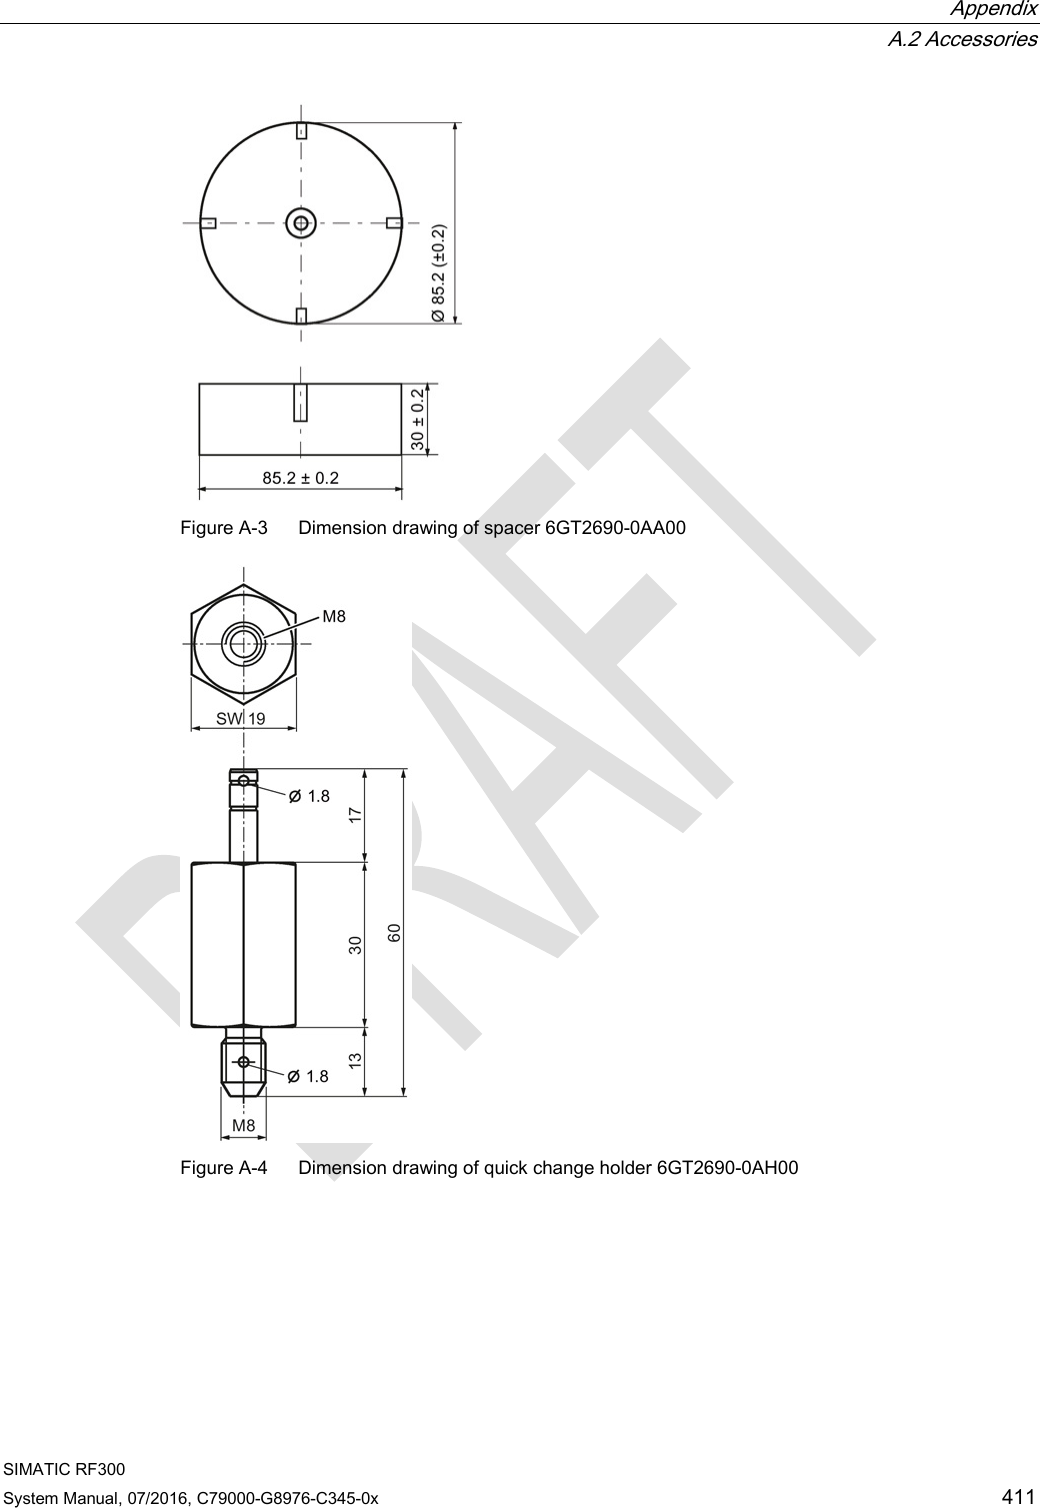  Appendix  A.2 Accessories SIMATIC RF300 System Manual, 07/2016, C79000-G8976-C345-0x 411  Figure A-3  Dimension drawing of spacer 6GT2690-0AA00  Figure A-4  Dimension drawing of quick change holder 6GT2690-0AH00 